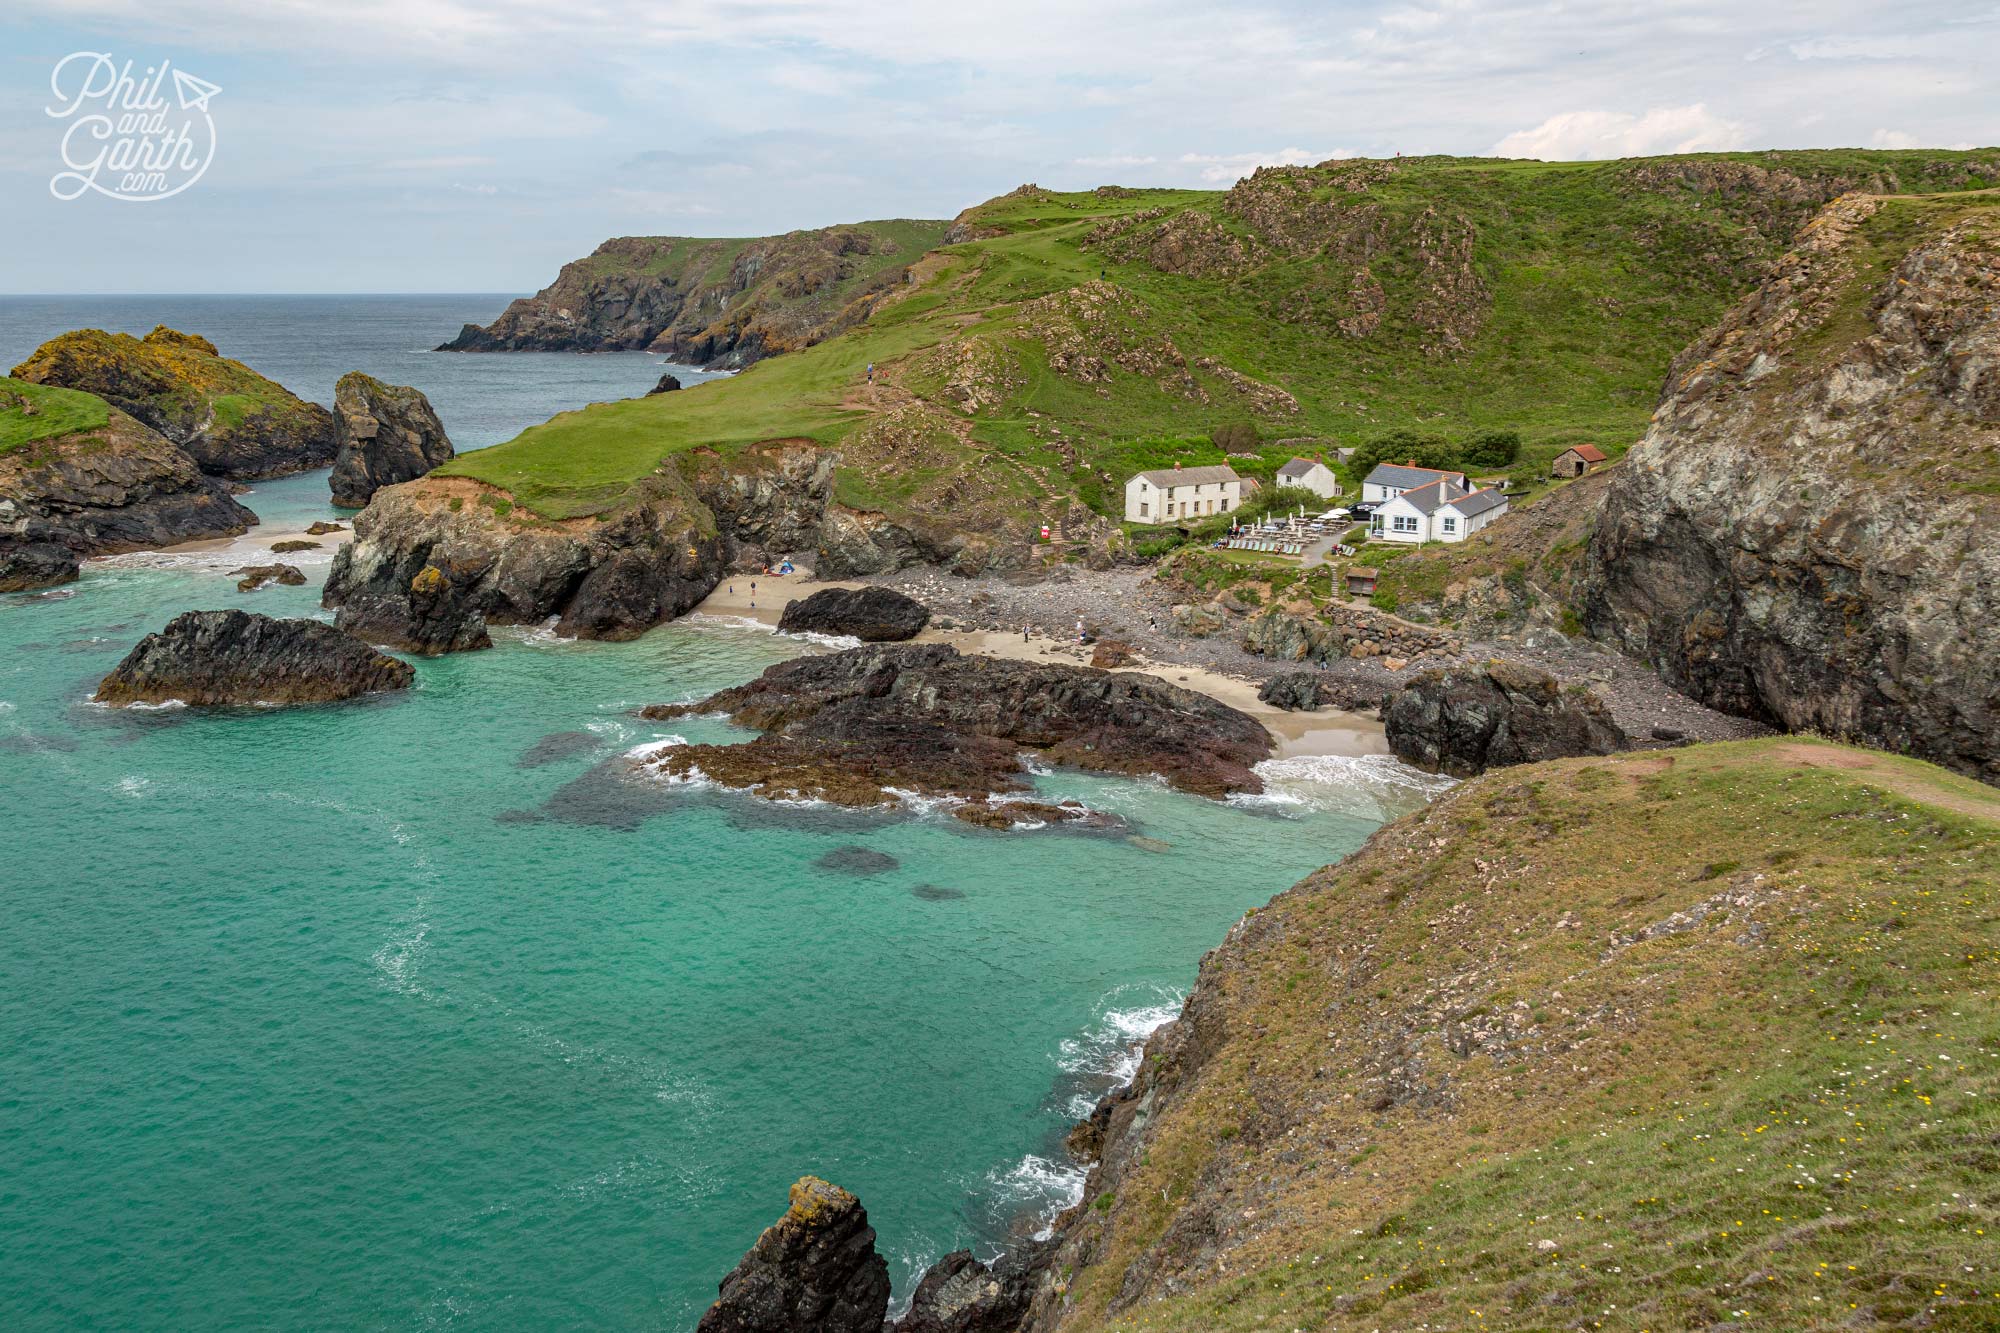 Kynance Cove is one of the prettiest coves in Cornwall